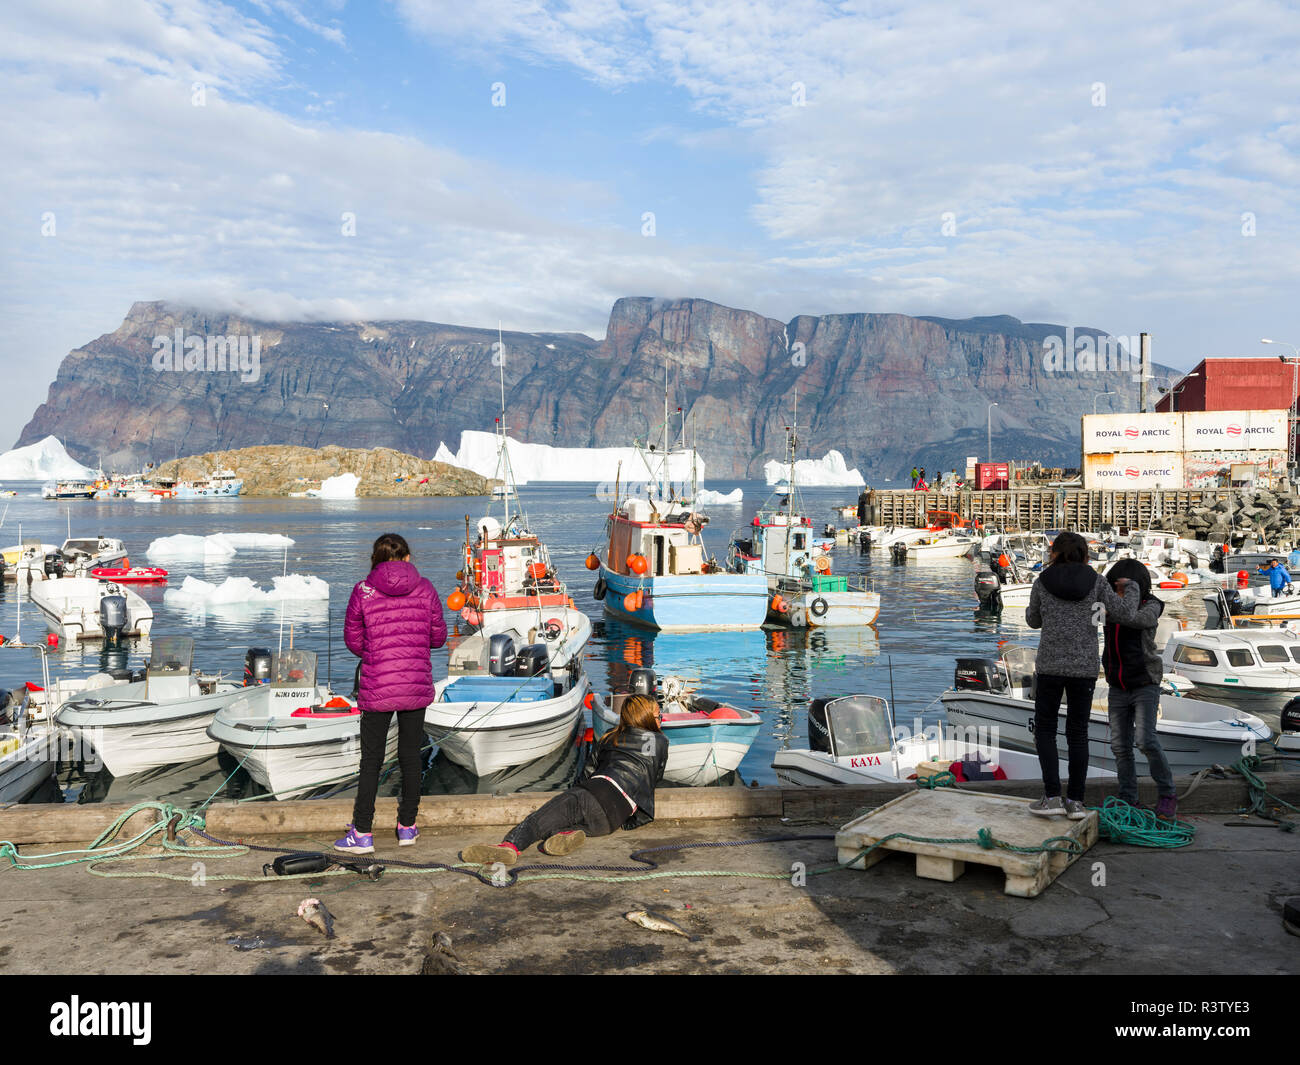 Harbor with kids fishing and typical fishing boats. Small town of Uummannaq in northwest Greenland, Denmark (Editorial Use Only) Stock Photo